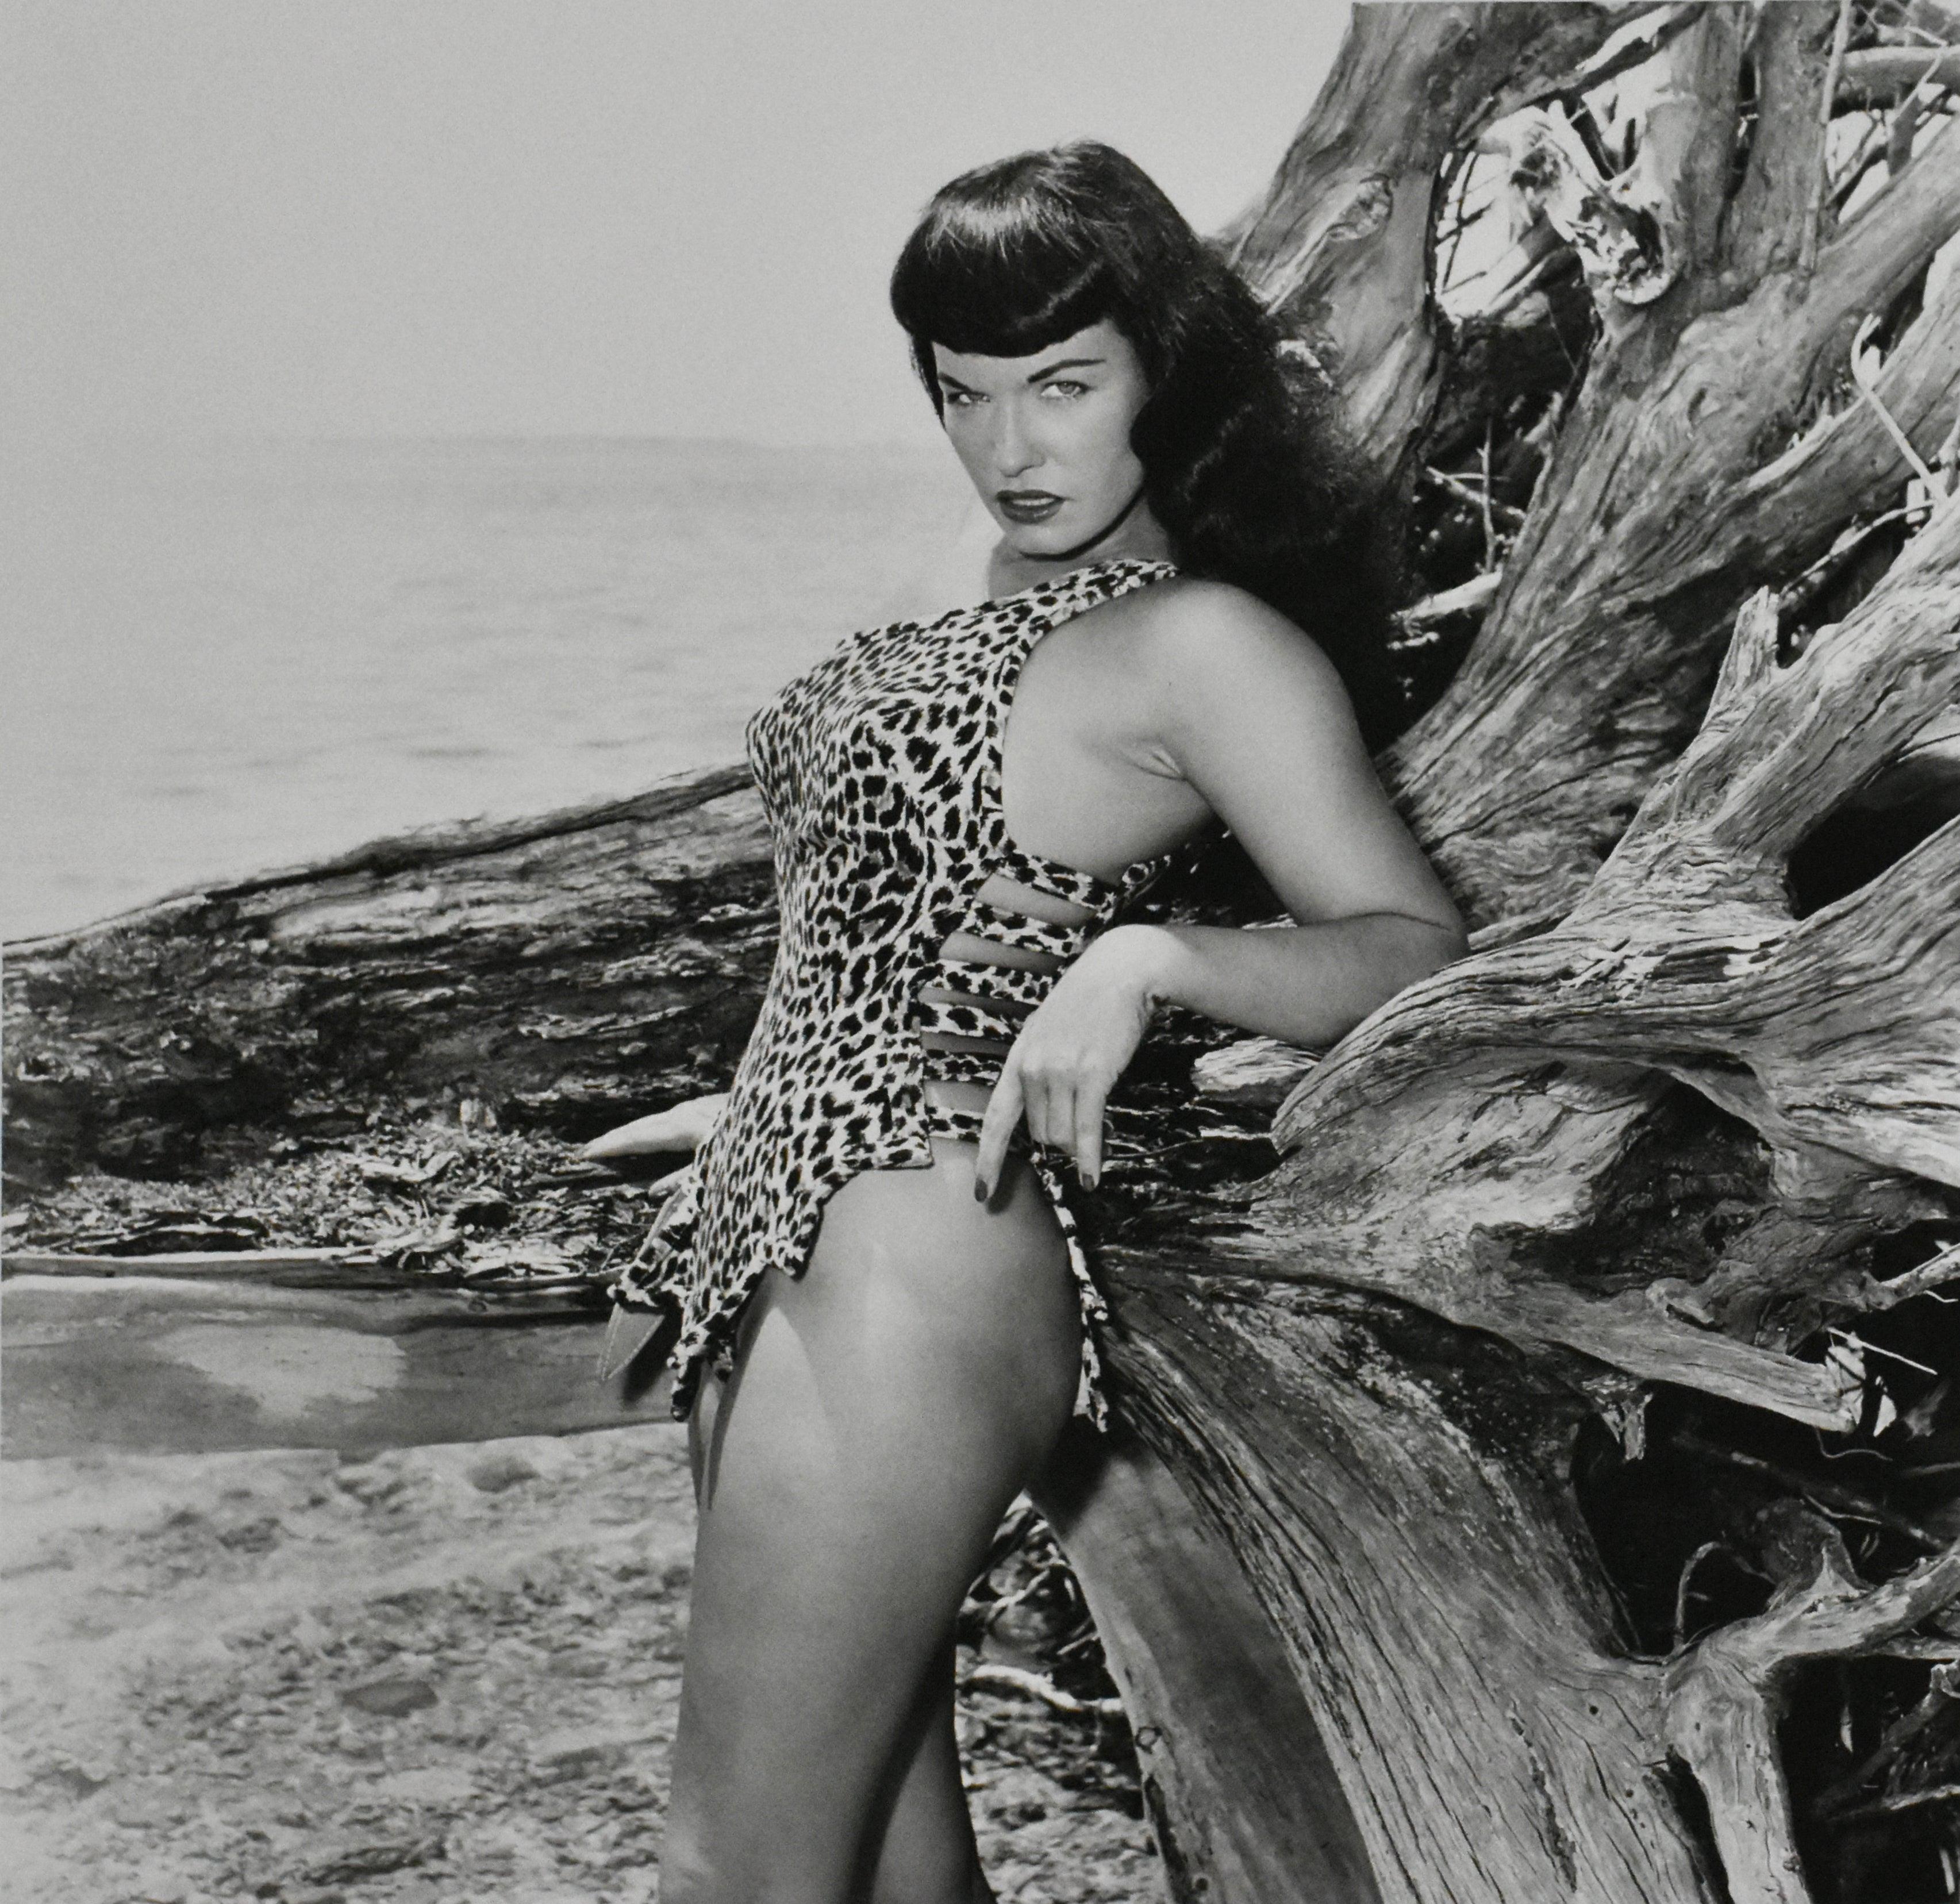 Bettie page with driftwood, key Biscayne, Florida, 1954 by Bunny Yeager
Photographed in 1954
Printed in 2012
Gelatin silver print
Sheet size: 19.75 in. H x 16 in. W
Image size: 15 in. H x 15 in. W
Edition 2 of 2
Unframed
Signed and numbered on